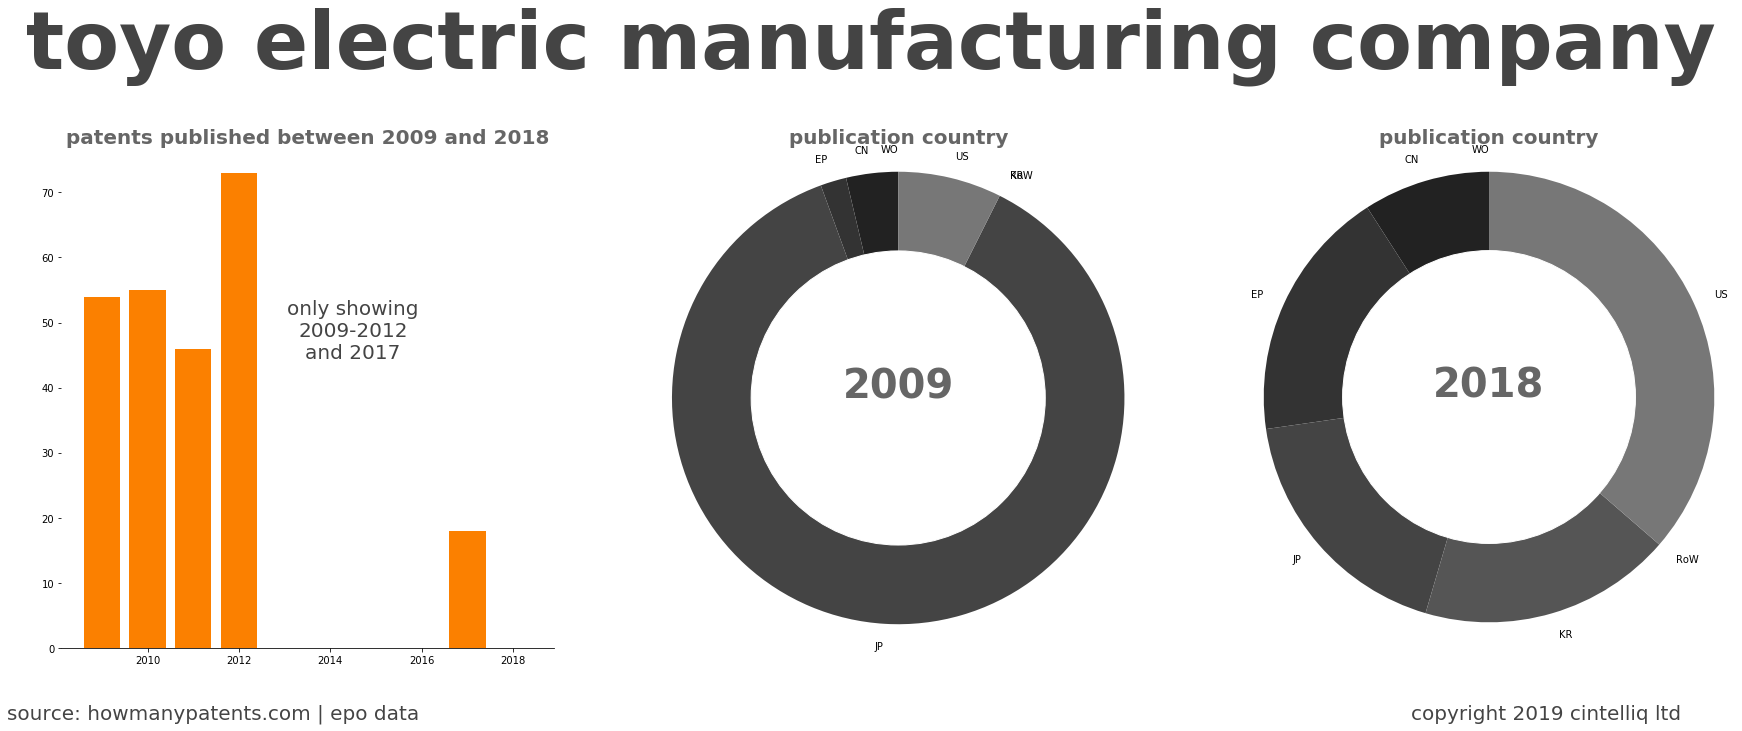 summary of patents for Toyo Electric Manufacturing Company